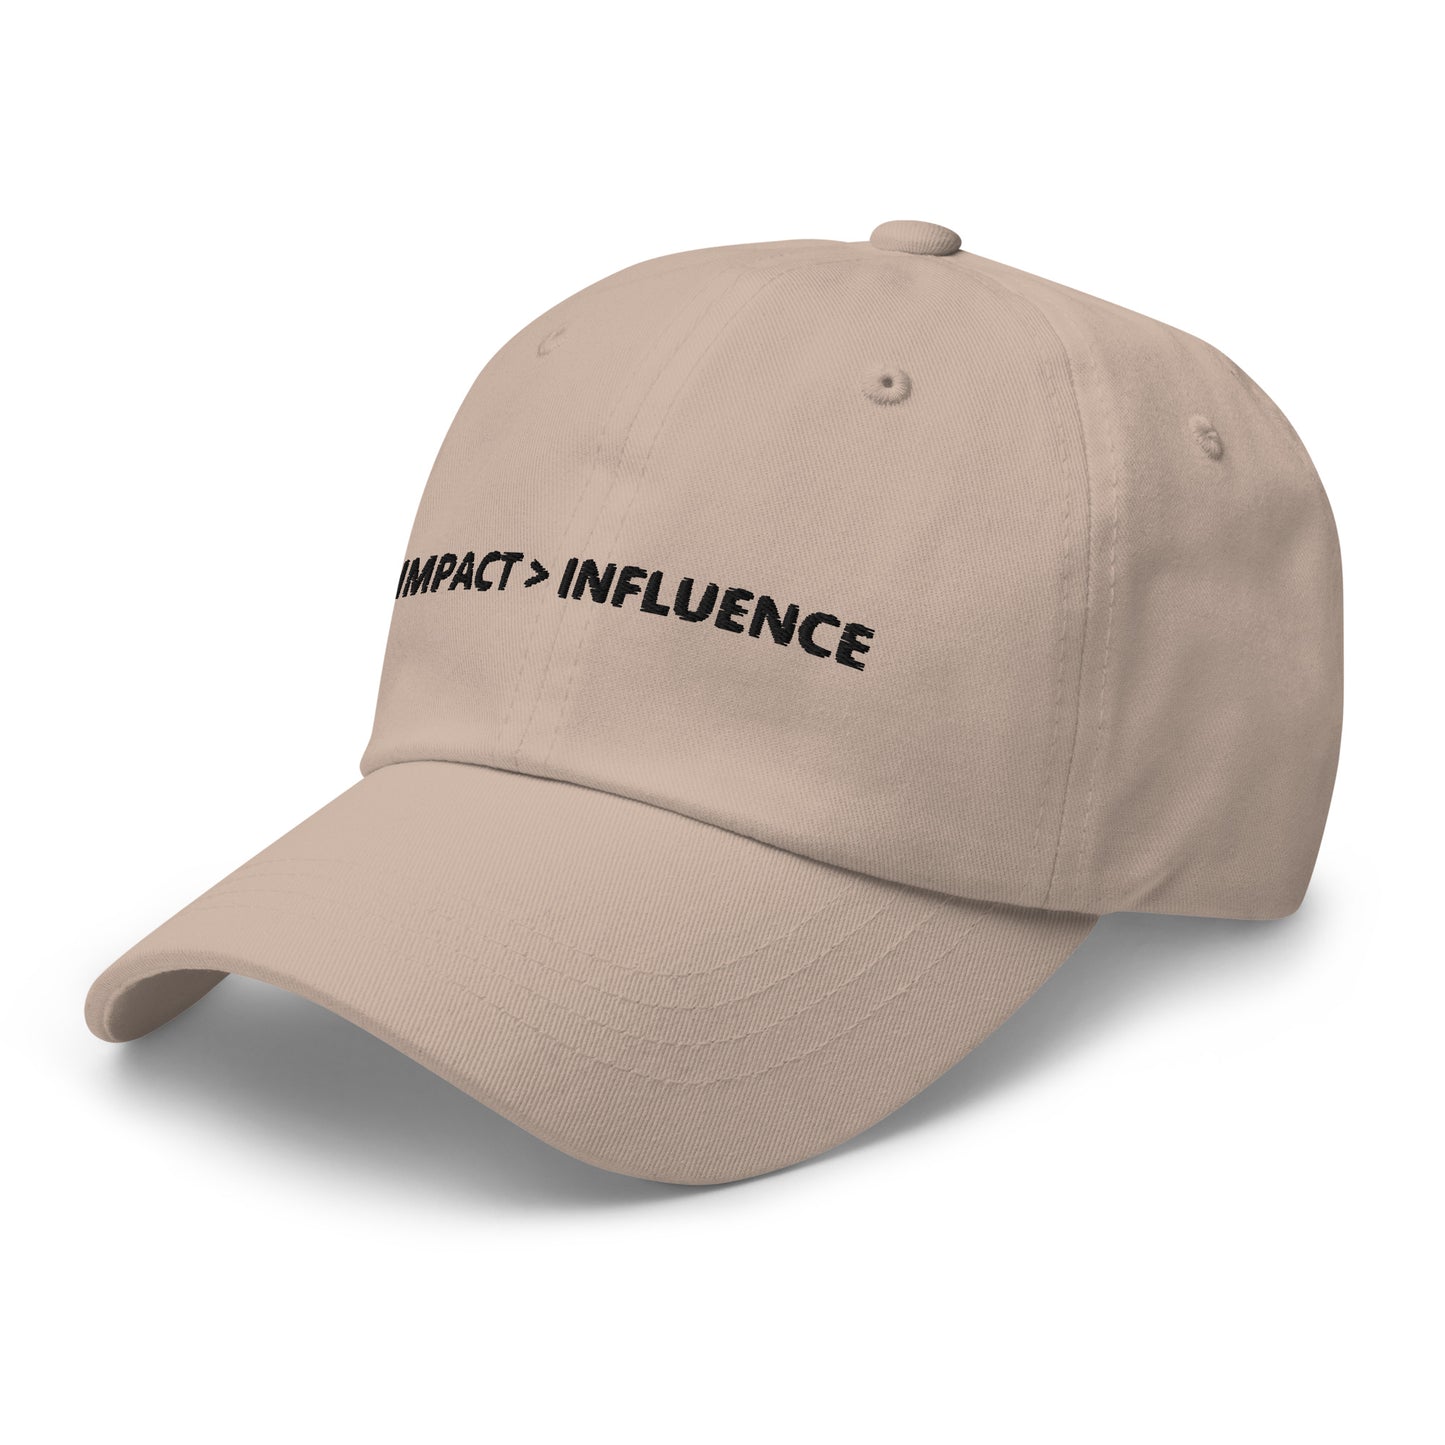 IMPACT > INFLUENCE Dad hat